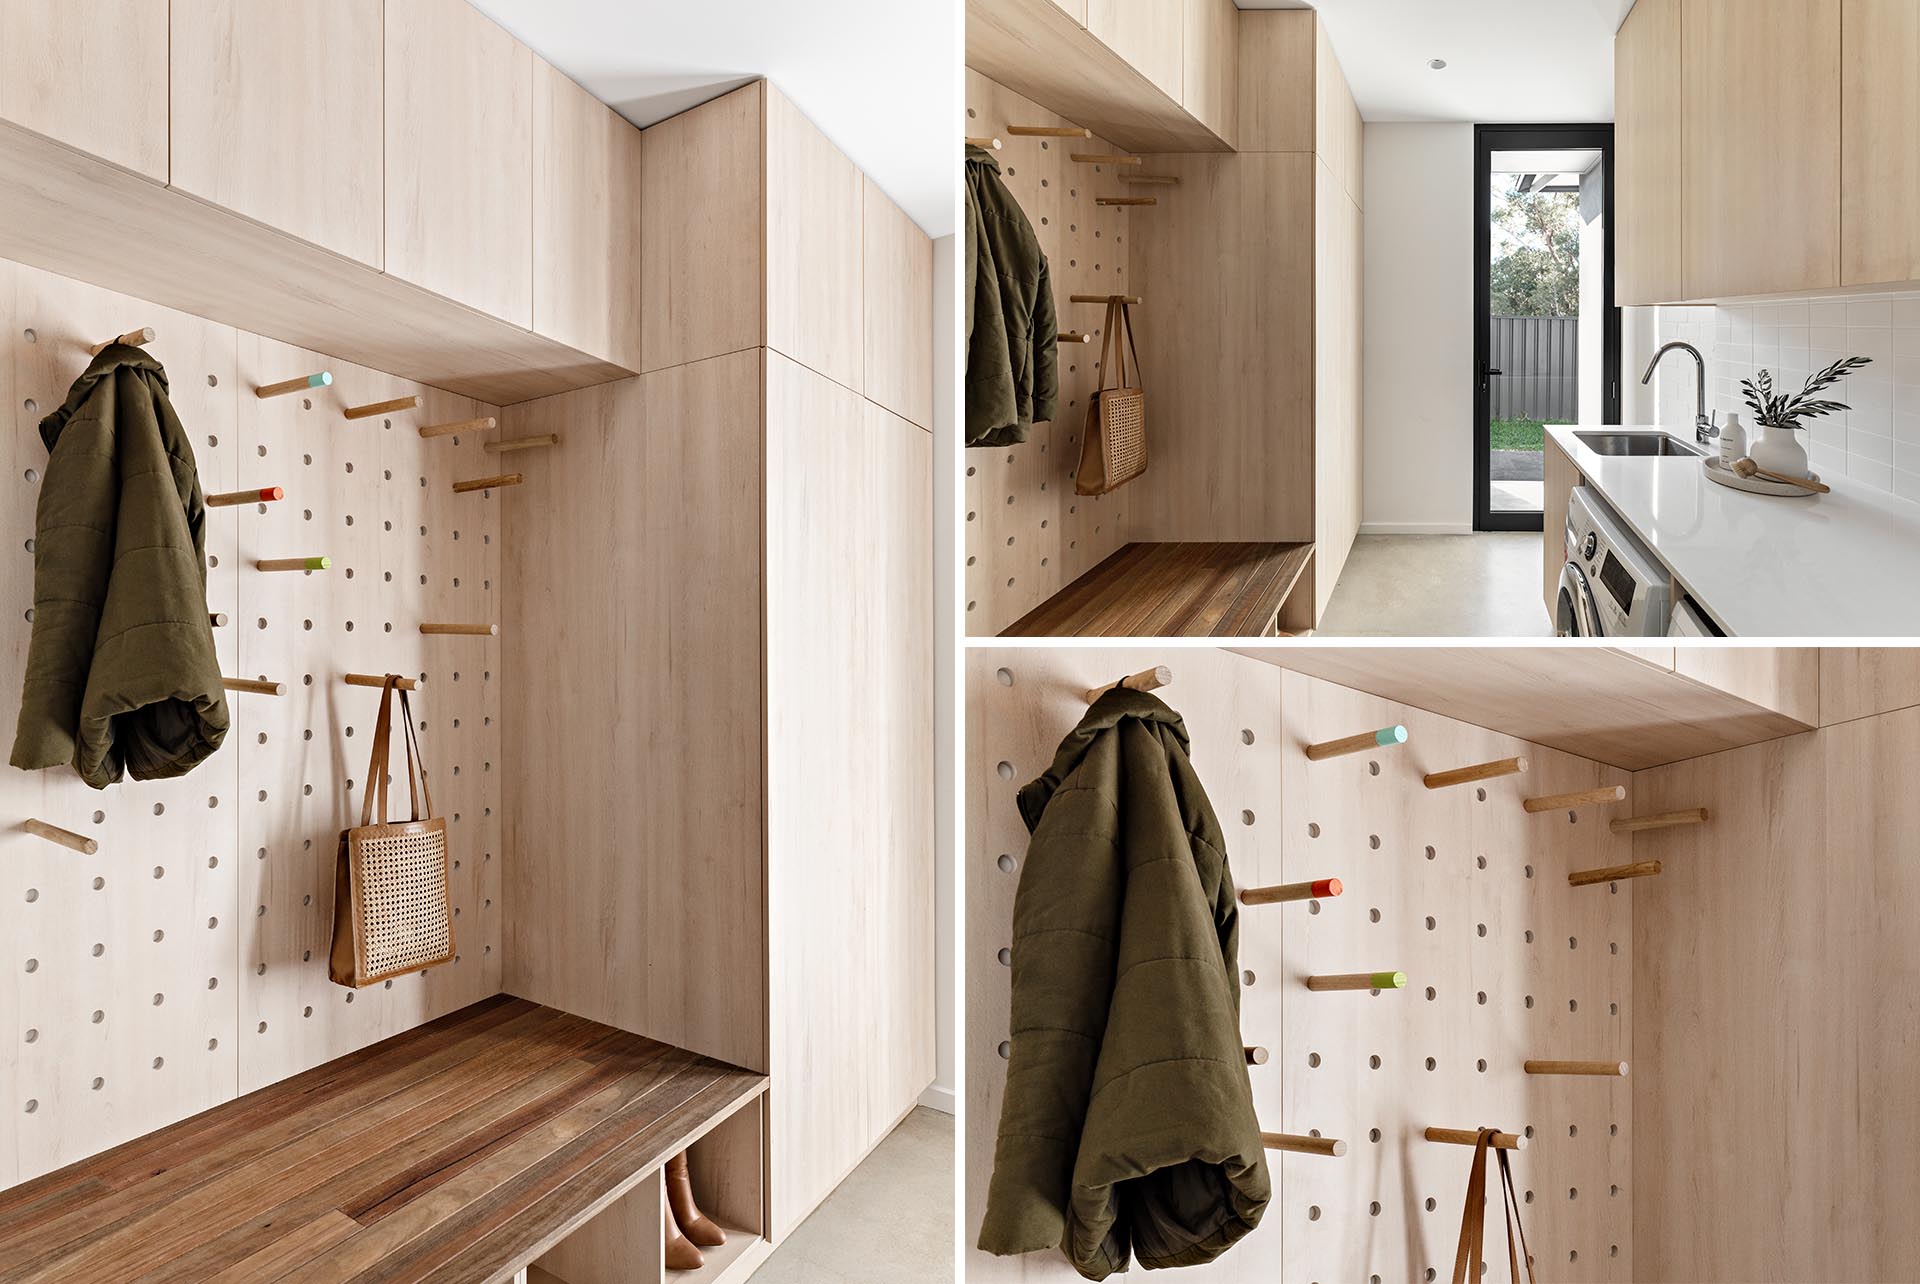 A modern mudroom / laundry room with minimalist wood cabinets, a wood bench, shoe storage, white countertop, and pegboard storage wall.